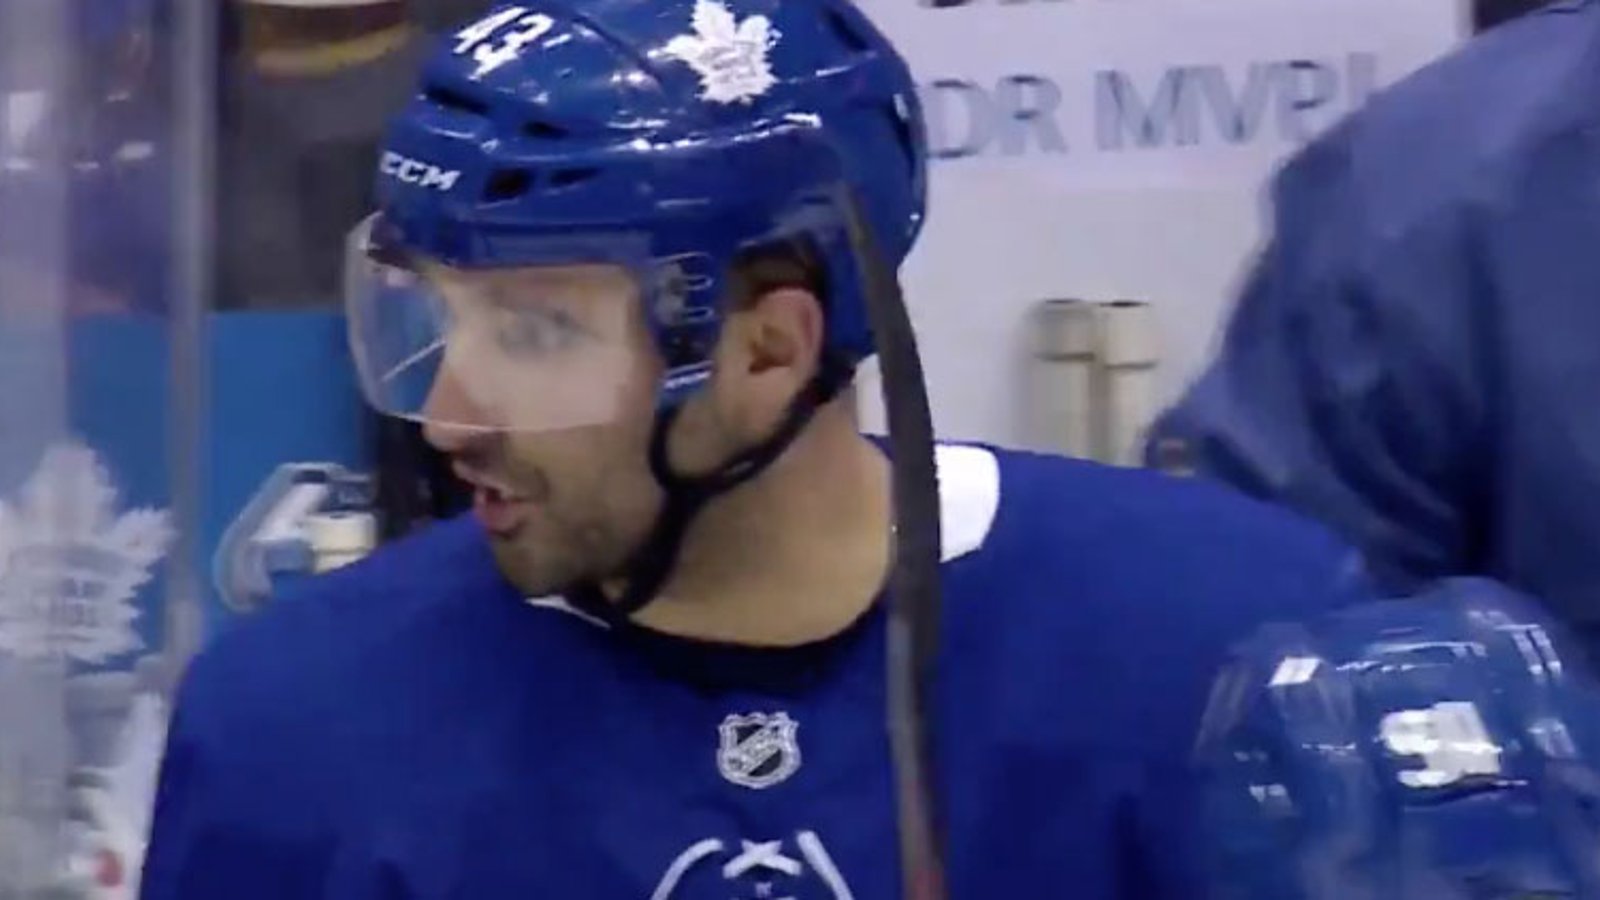 Kadri wins chirp of the year with response to Hawryluk after he scored his second goal of the game!